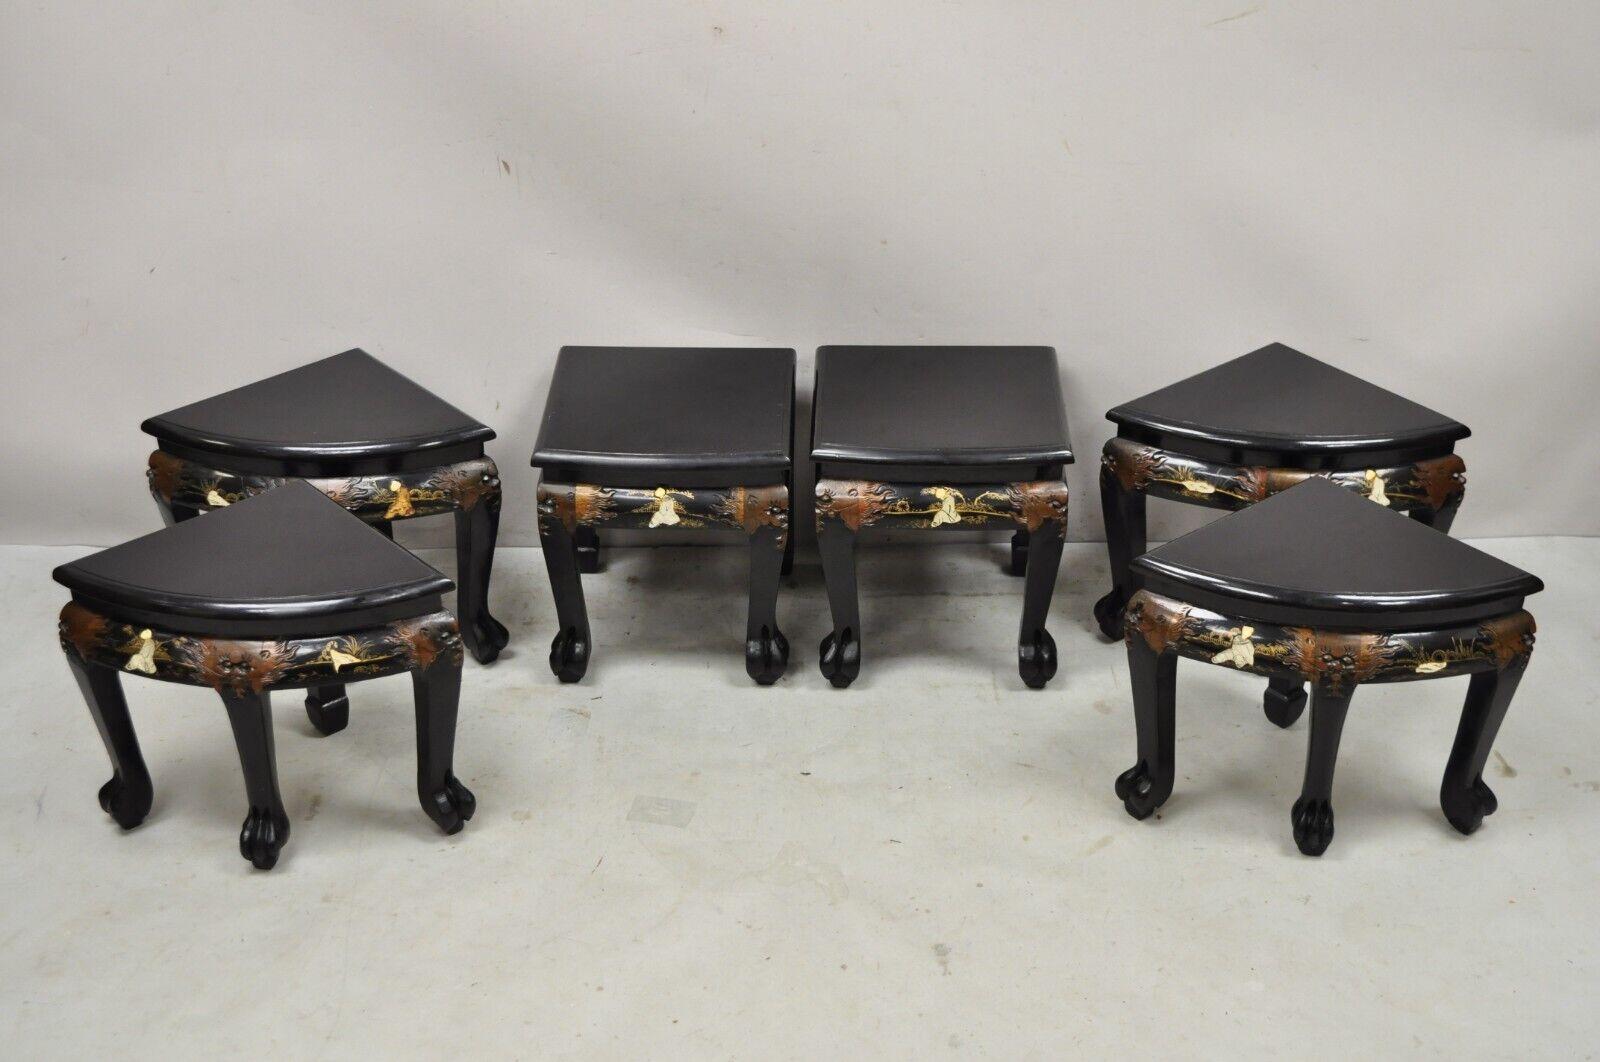 Chinese Export Chinese Black Lacquer Mother of Pearl Oval Nesting Coffee Table Set 6 Stools - A For Sale